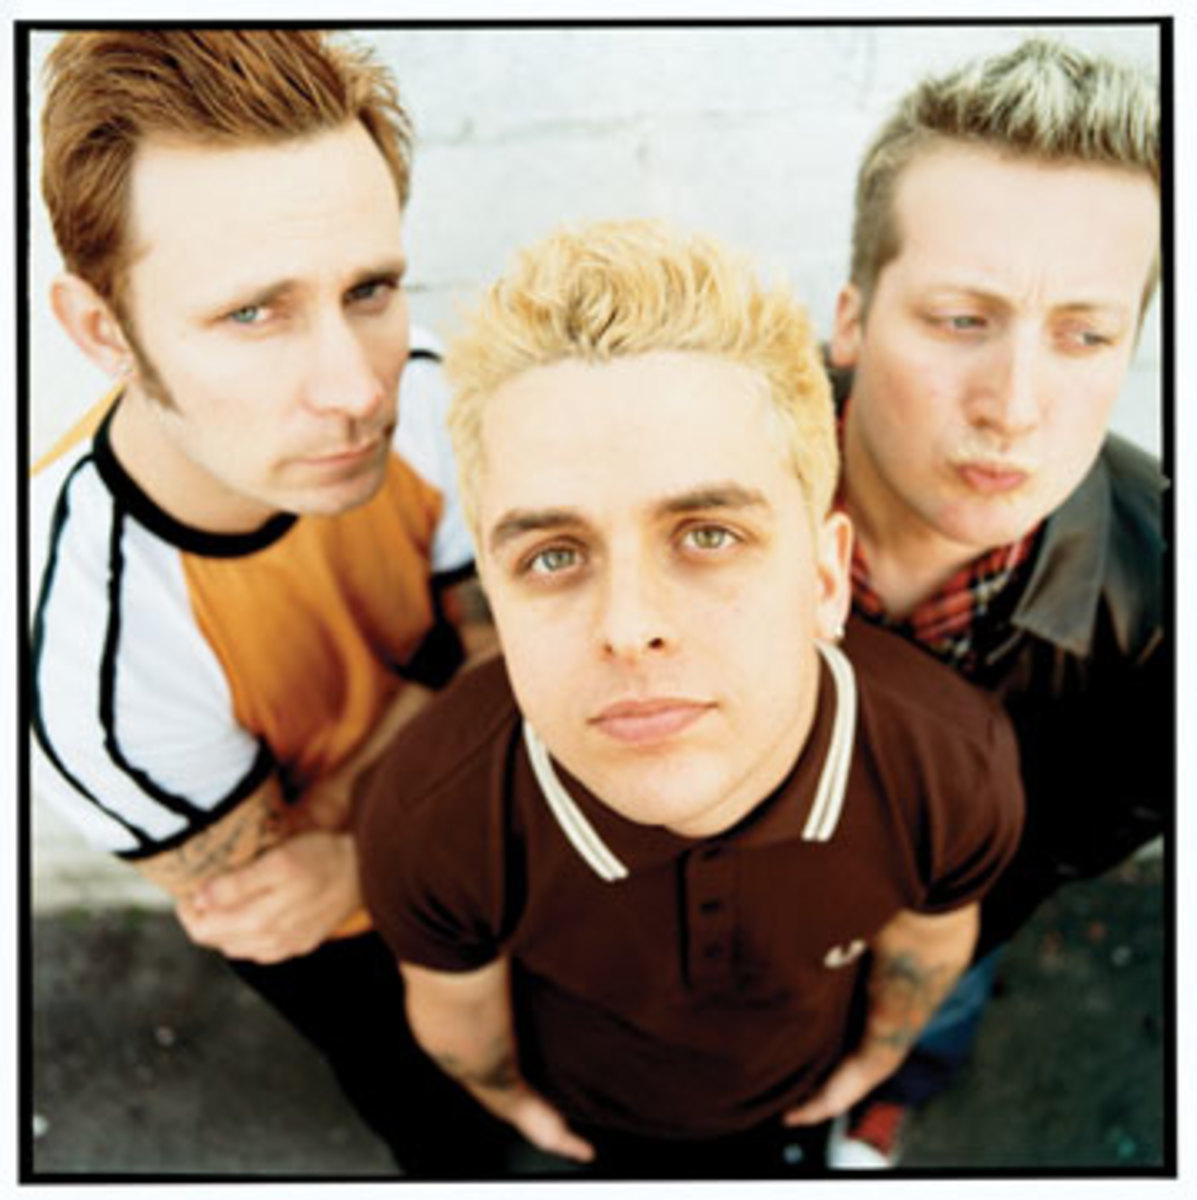 Green Day released "Shenanigans" in 2002. Photo courtesy Warner Bros.